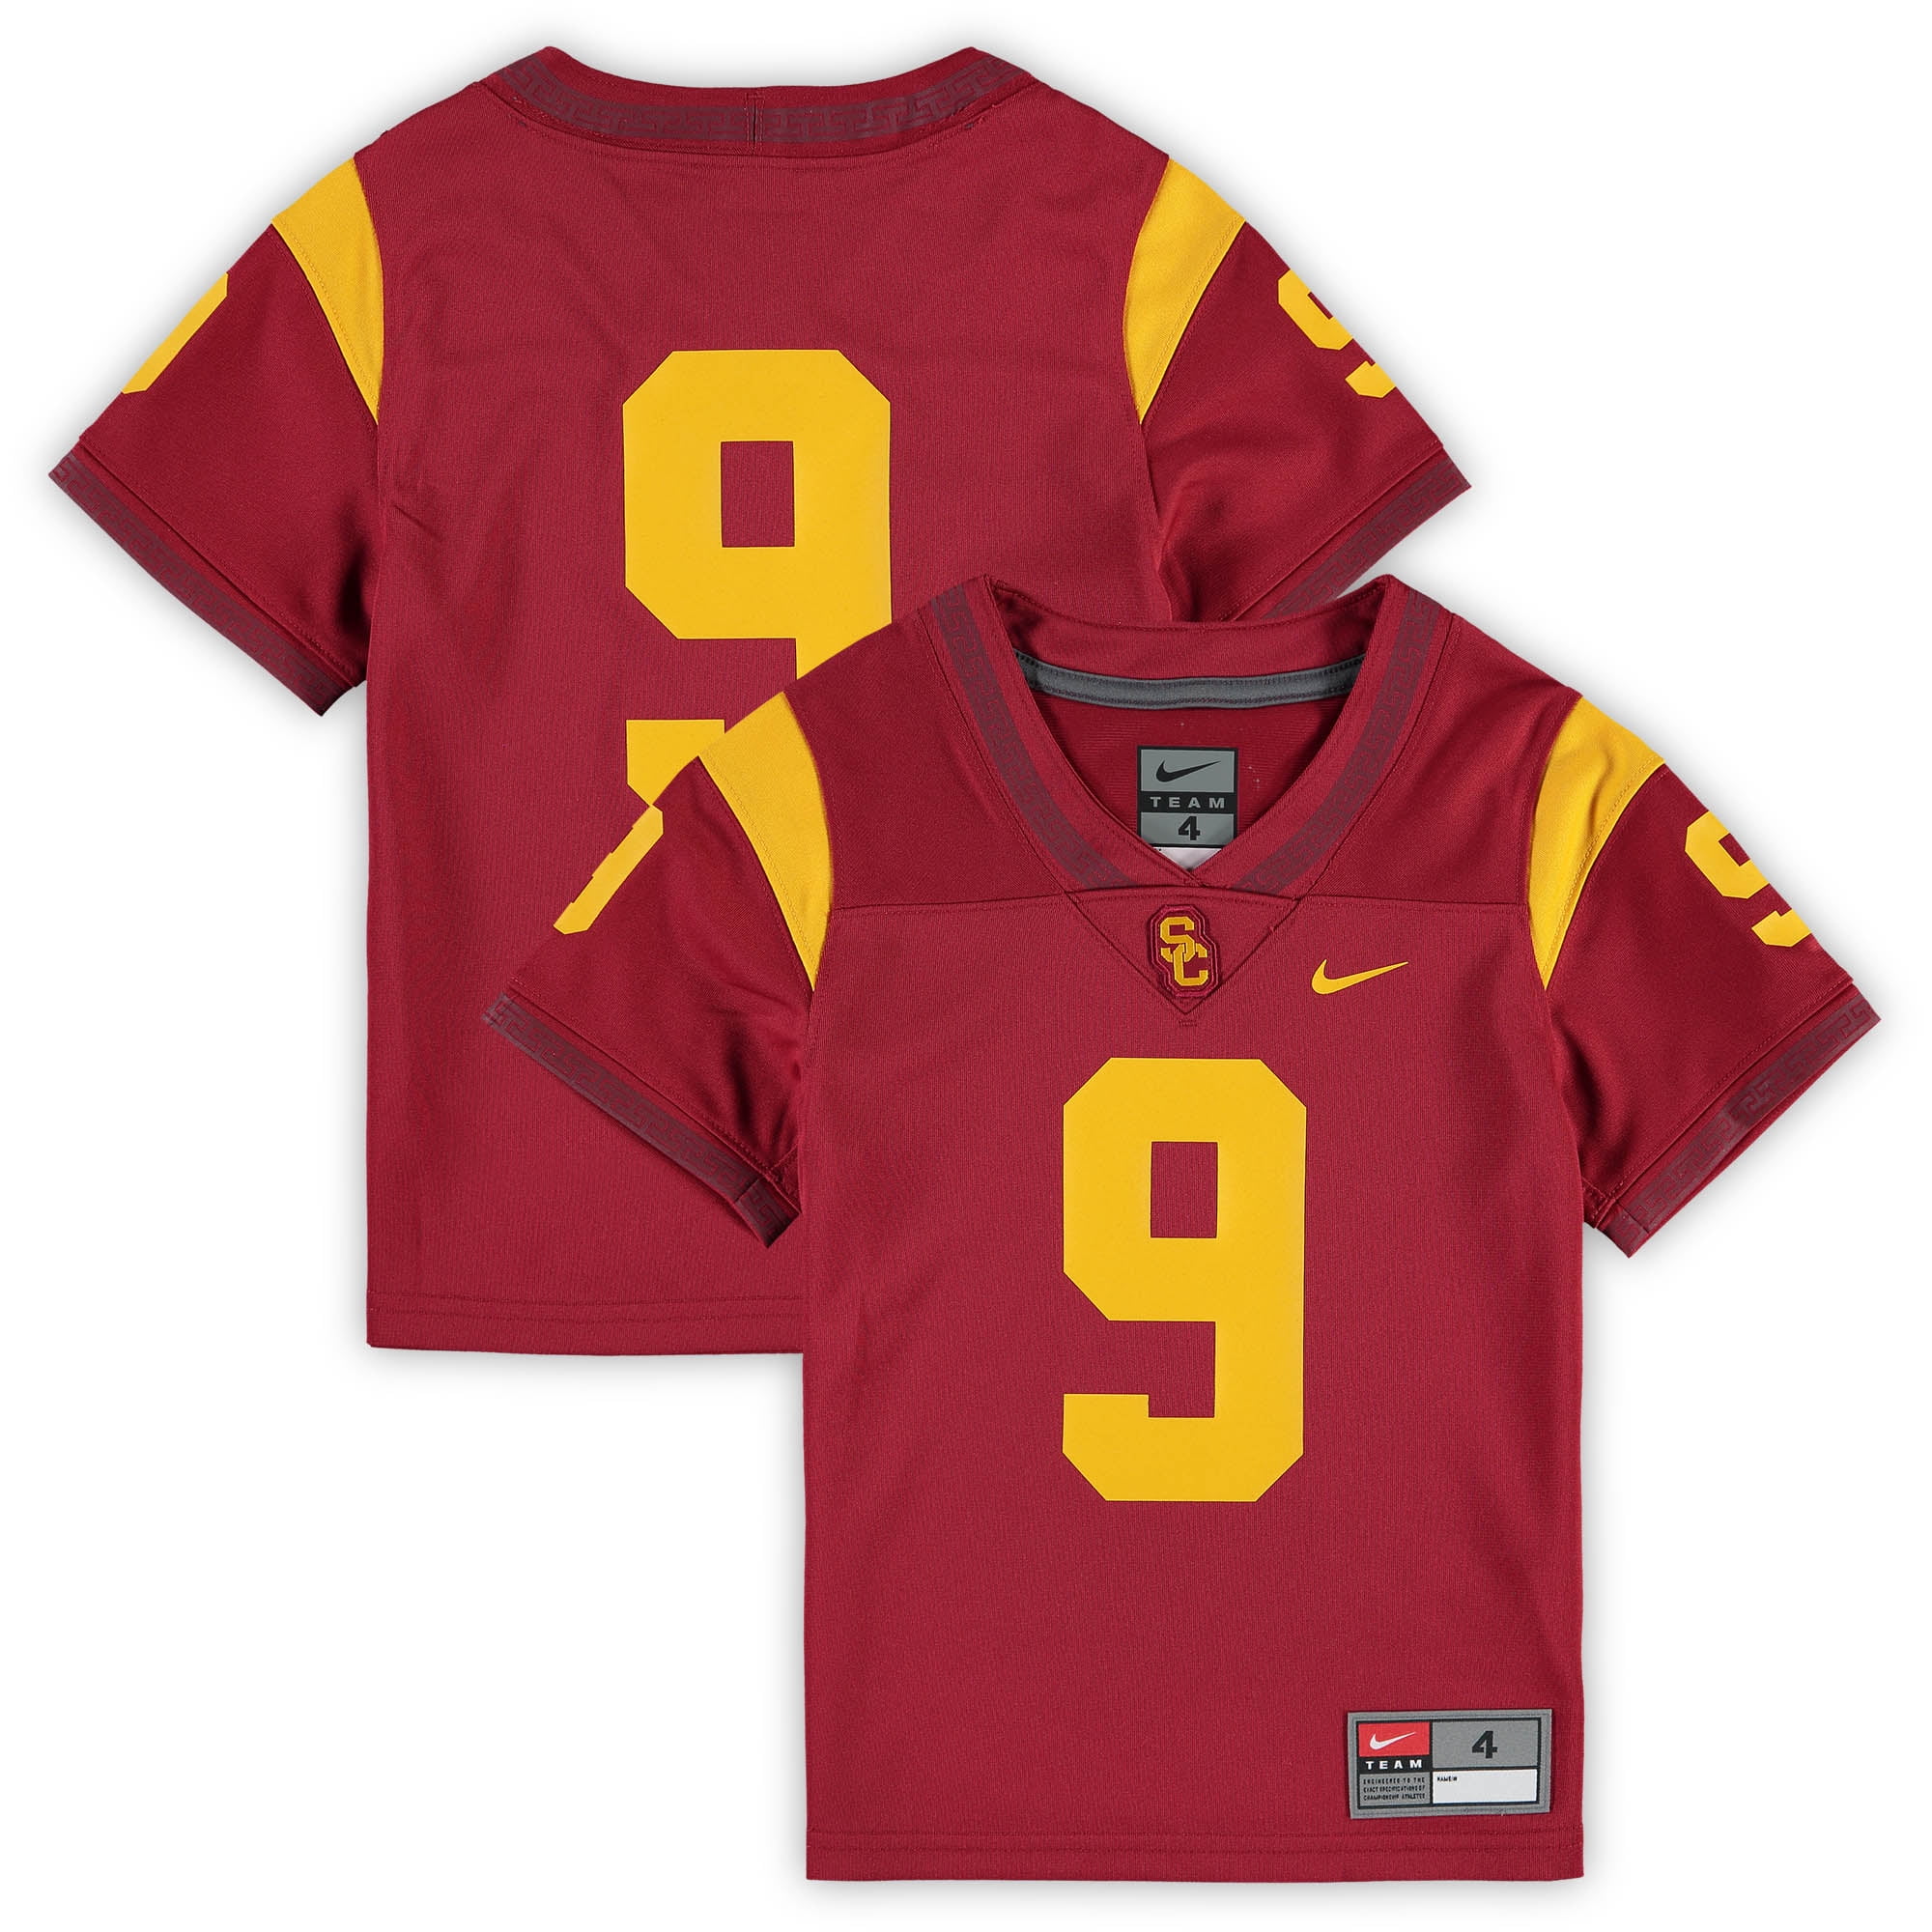 usc football jersey number 2